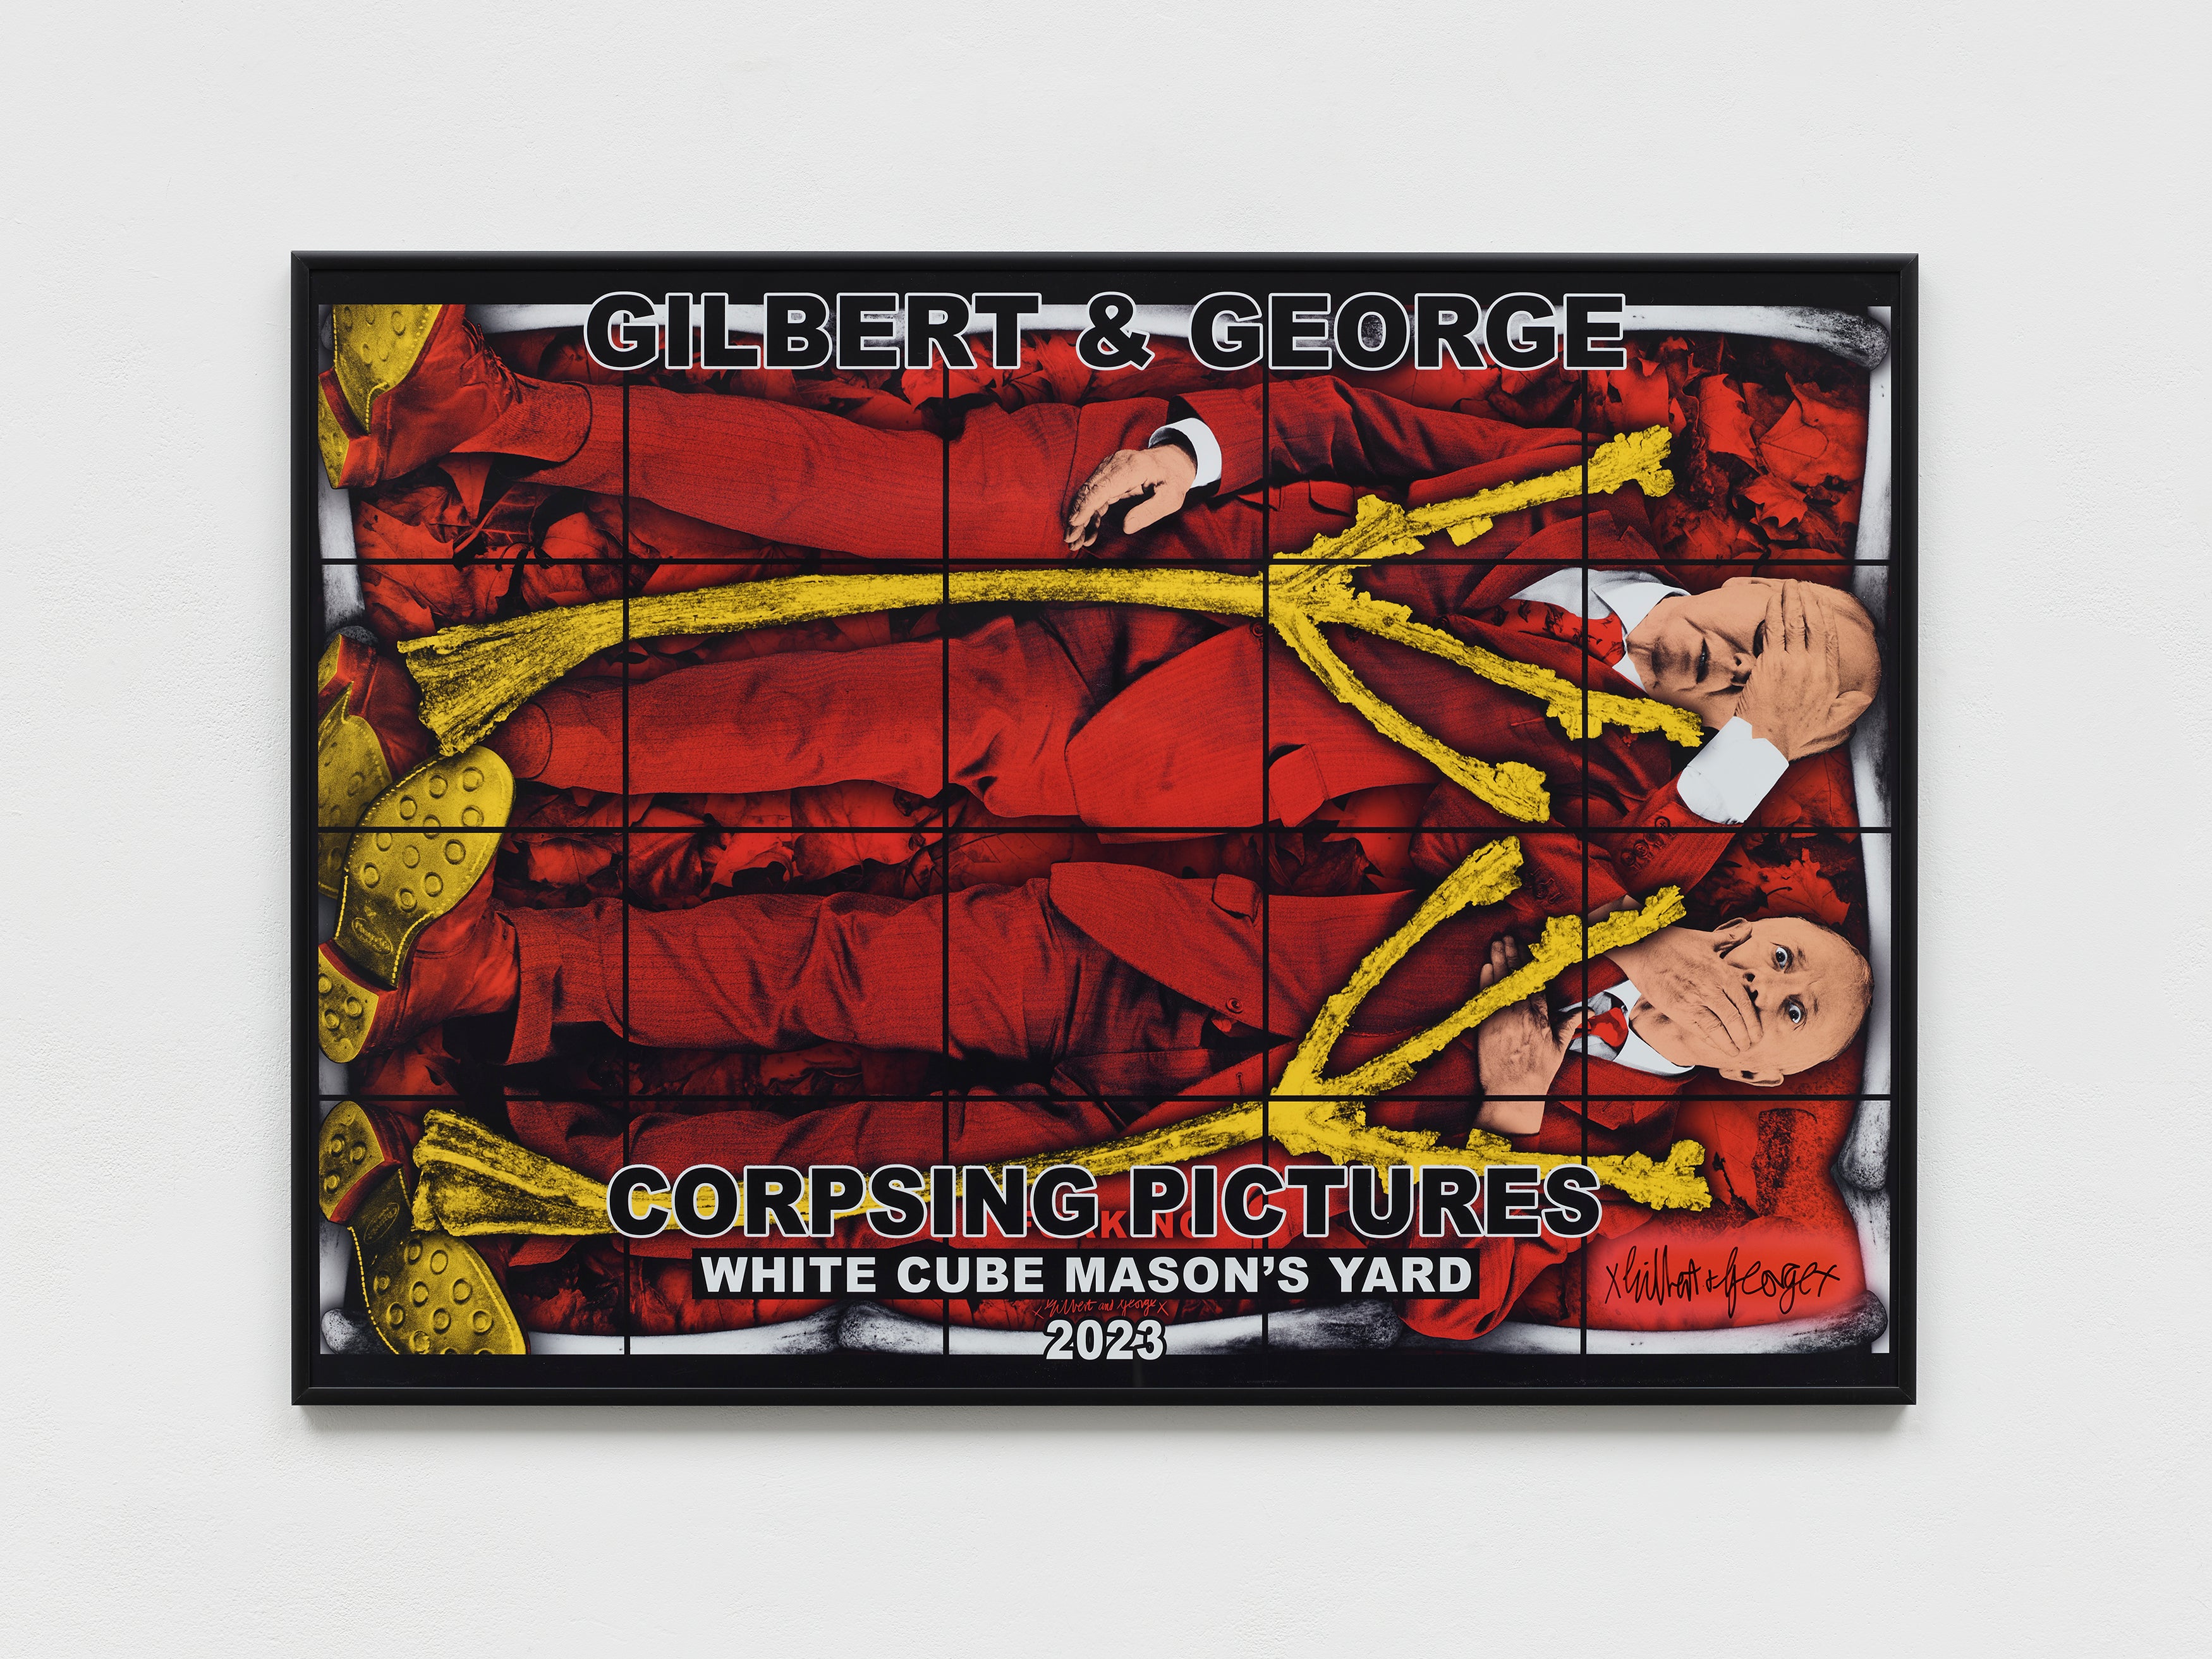 Gilbert & George 'THE CORPSING PICTURES' Poster Set